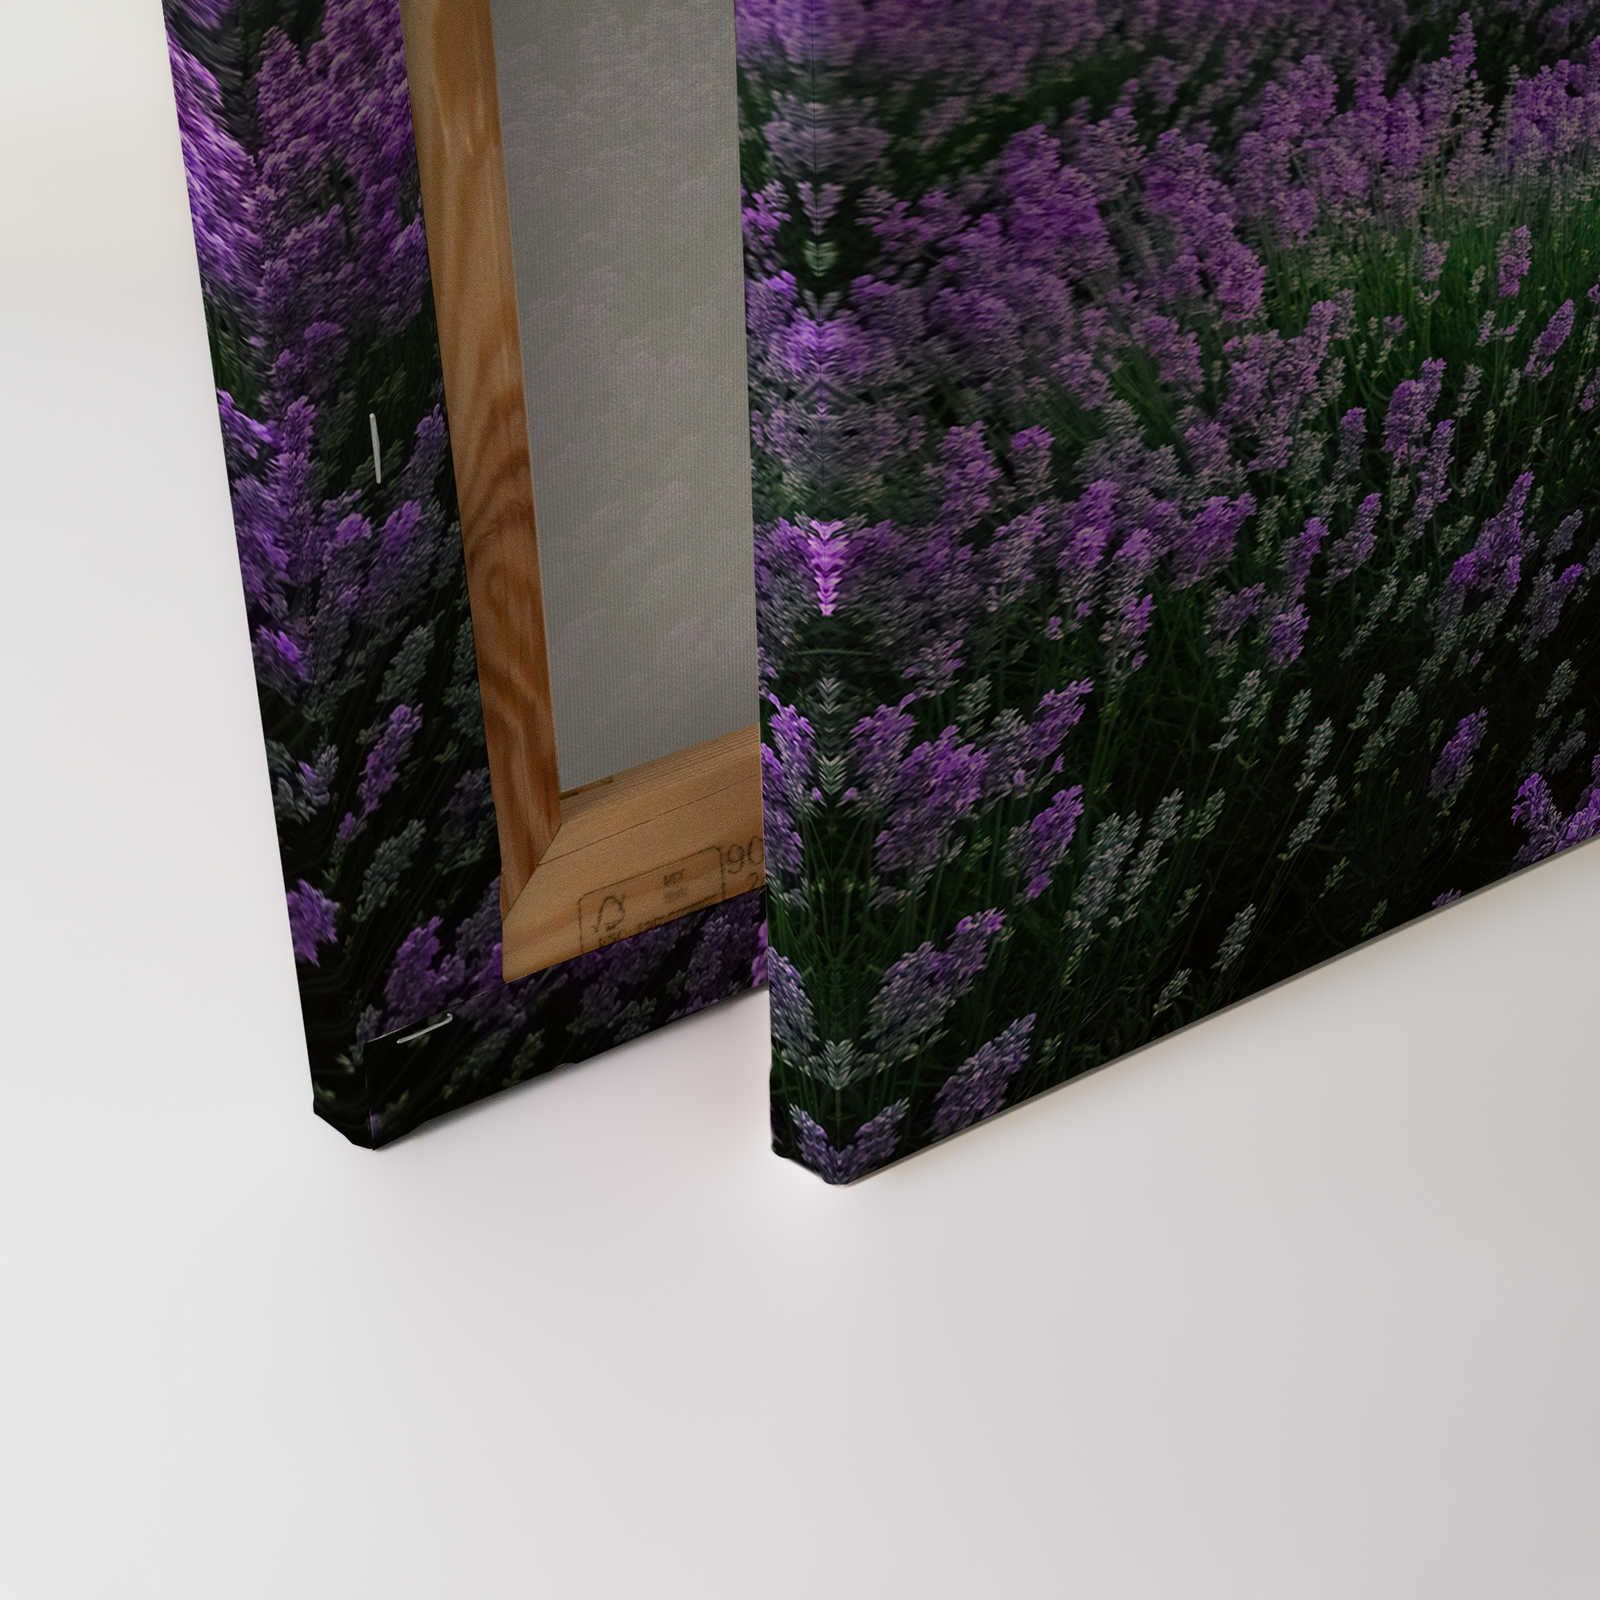             Canvas painting Lavender Field at Sunset - 0,90 m x 0,60 m
        